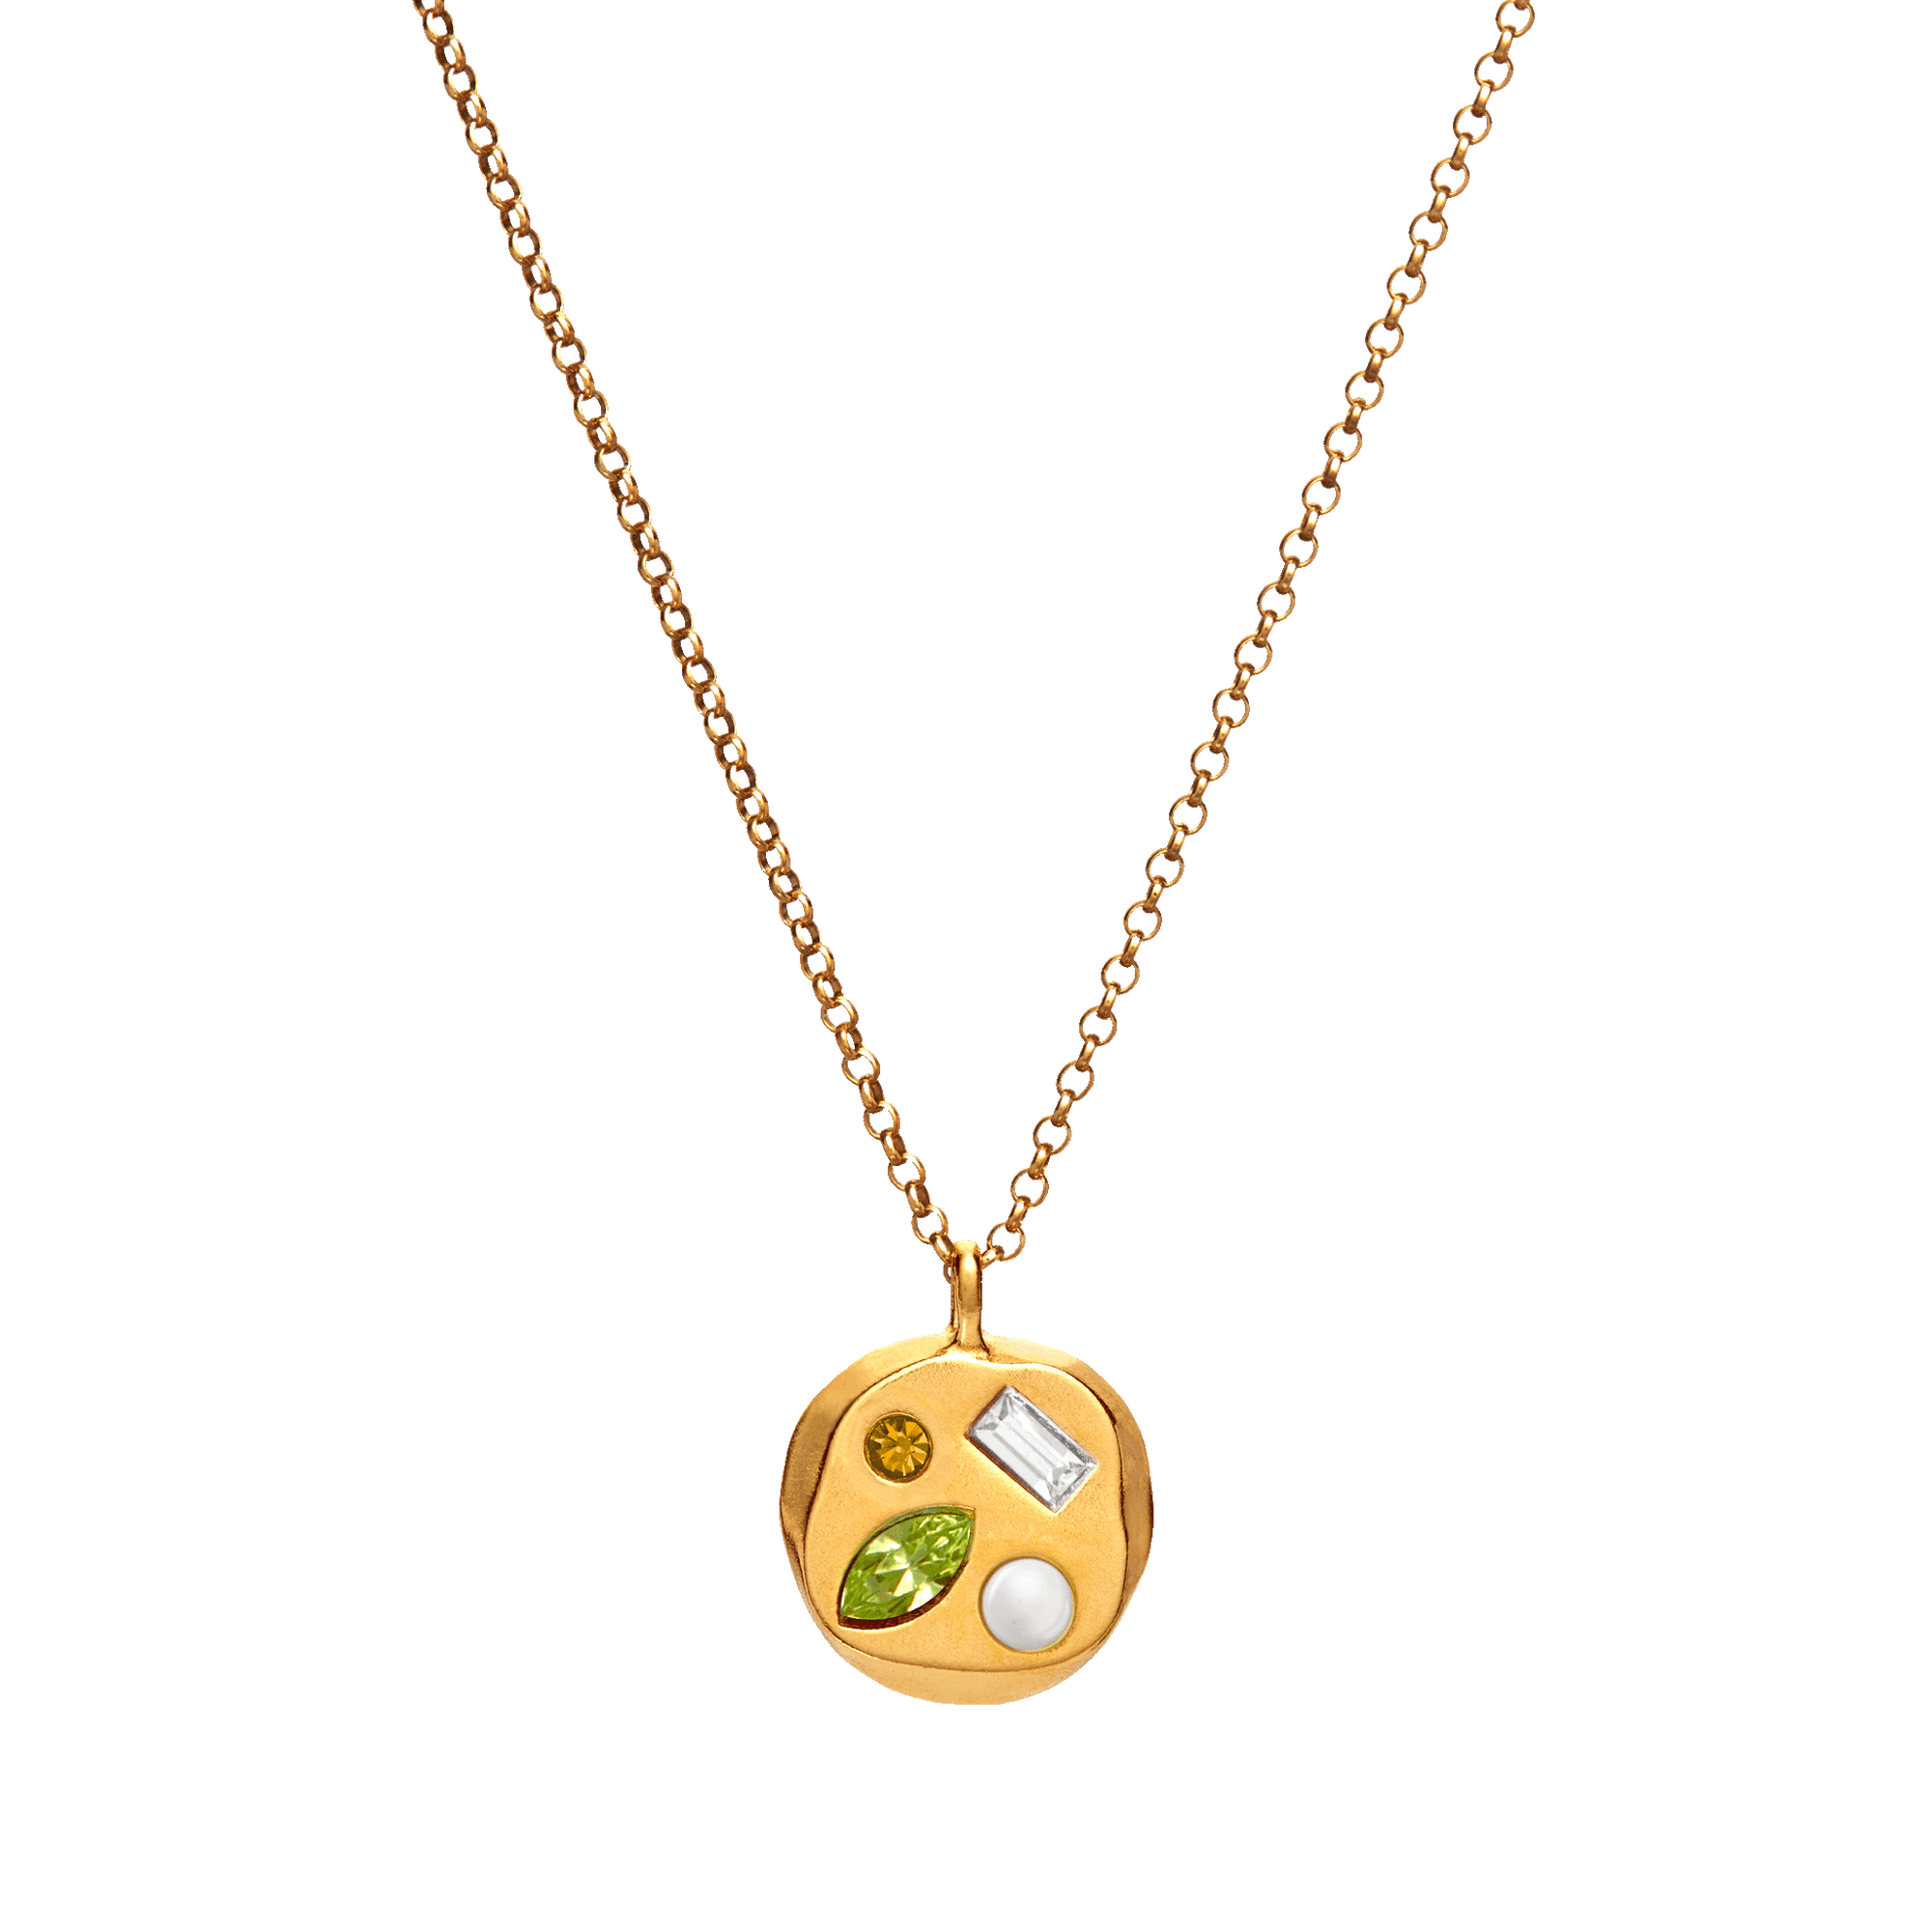 The August Tenth Pendant